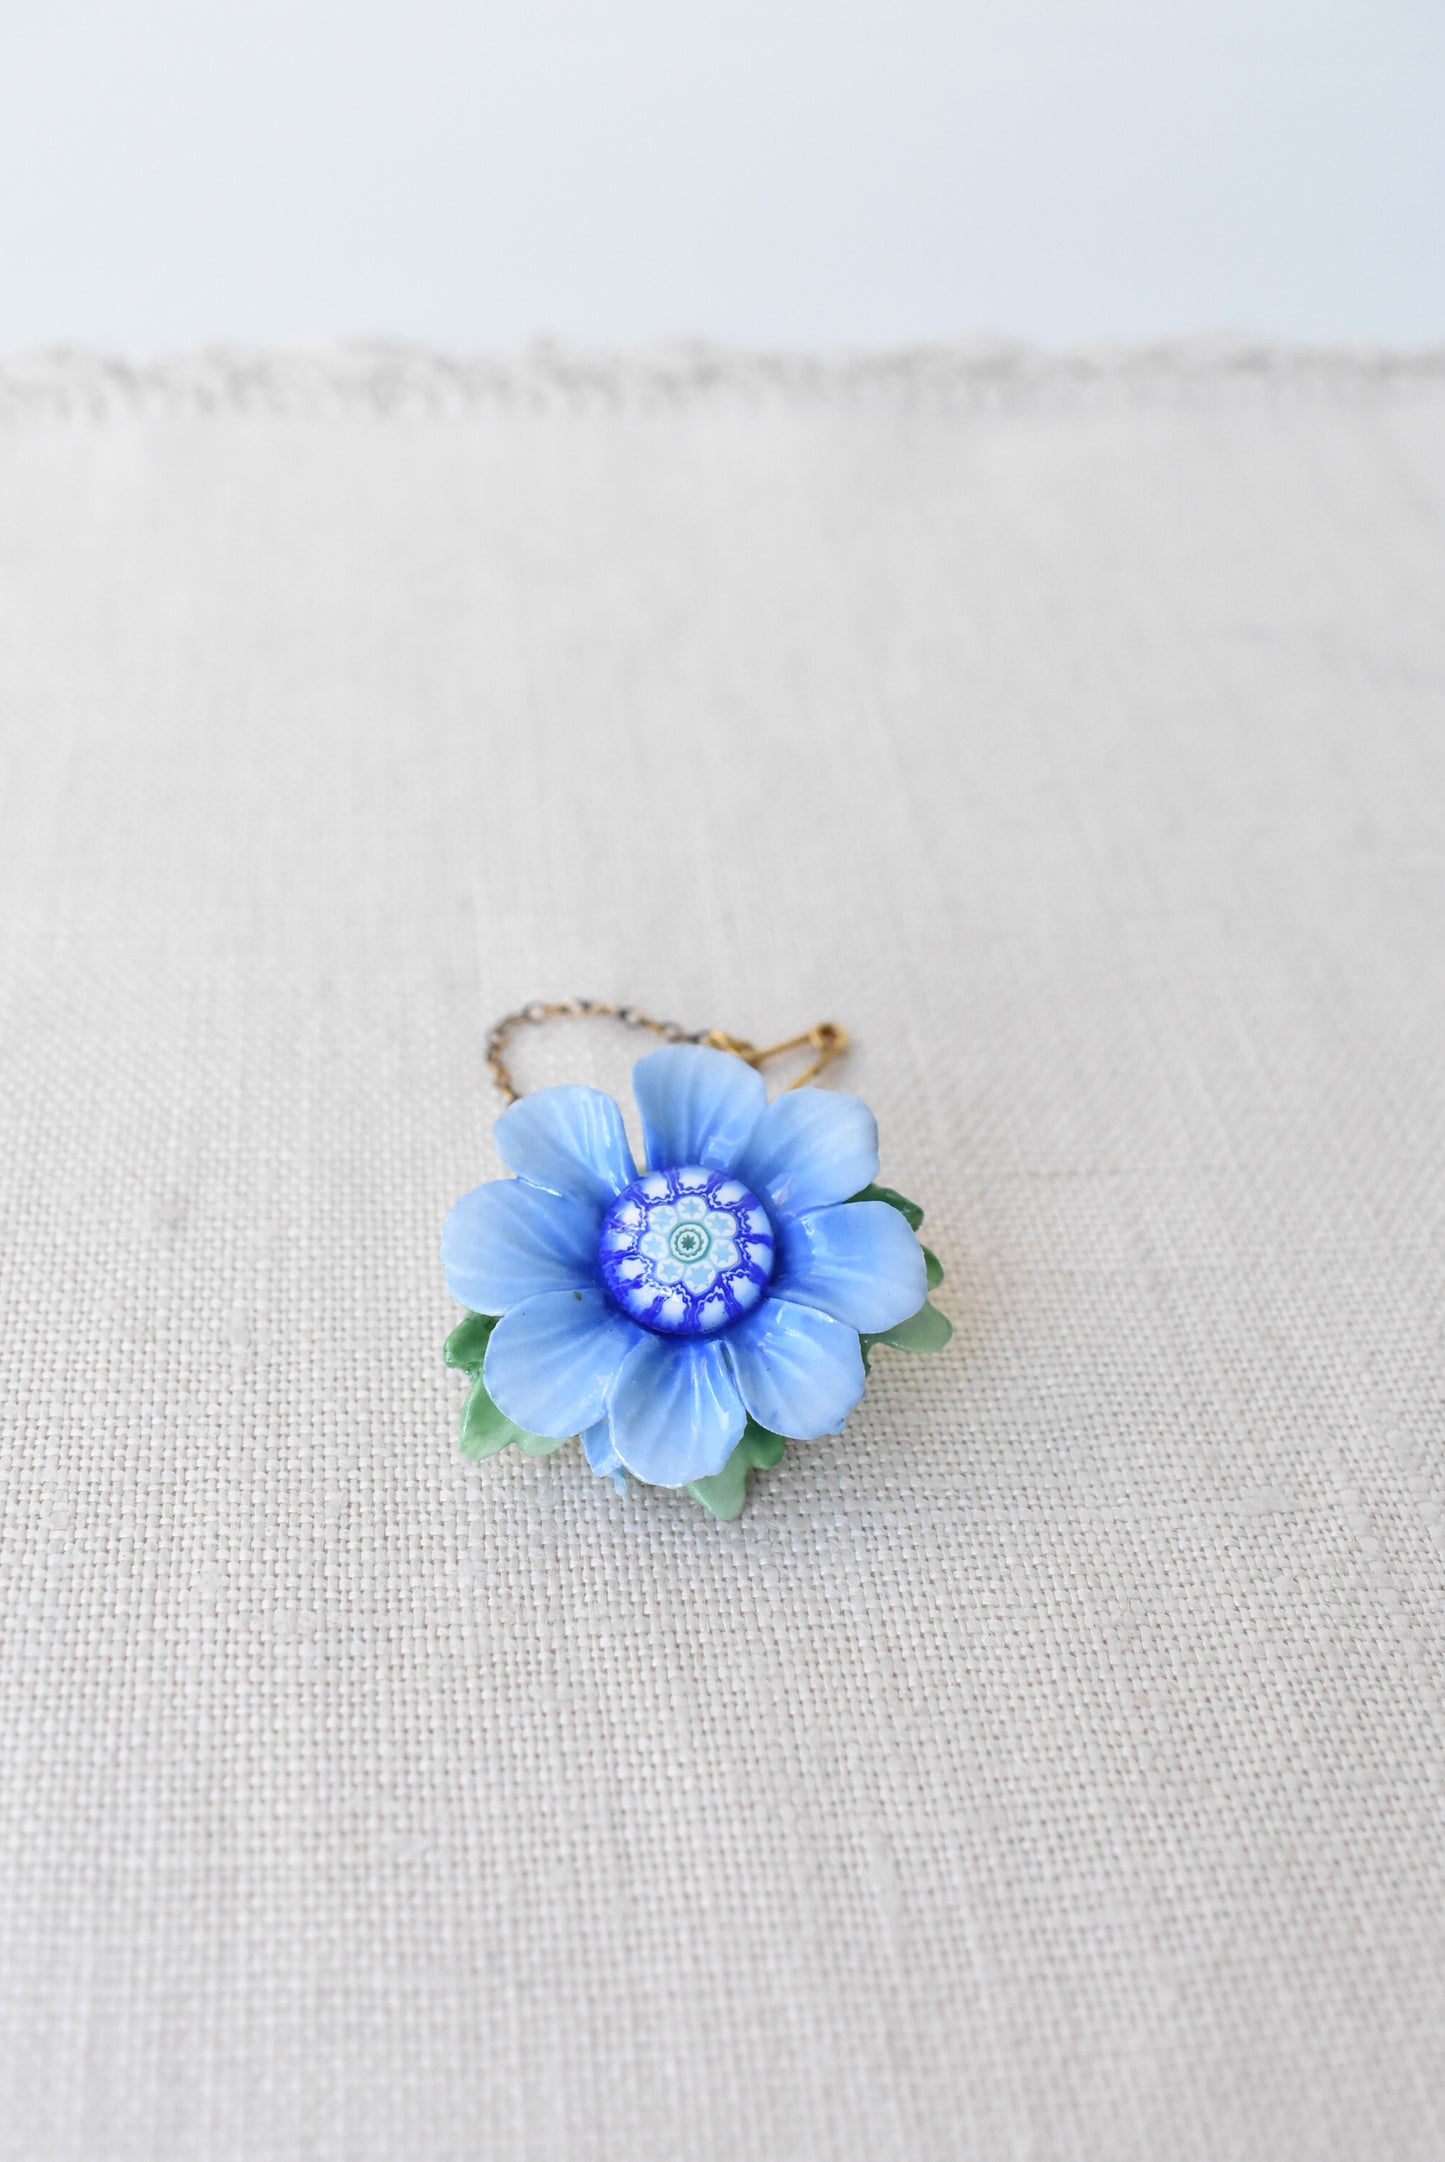 Crown English China and glass blue flower brooch